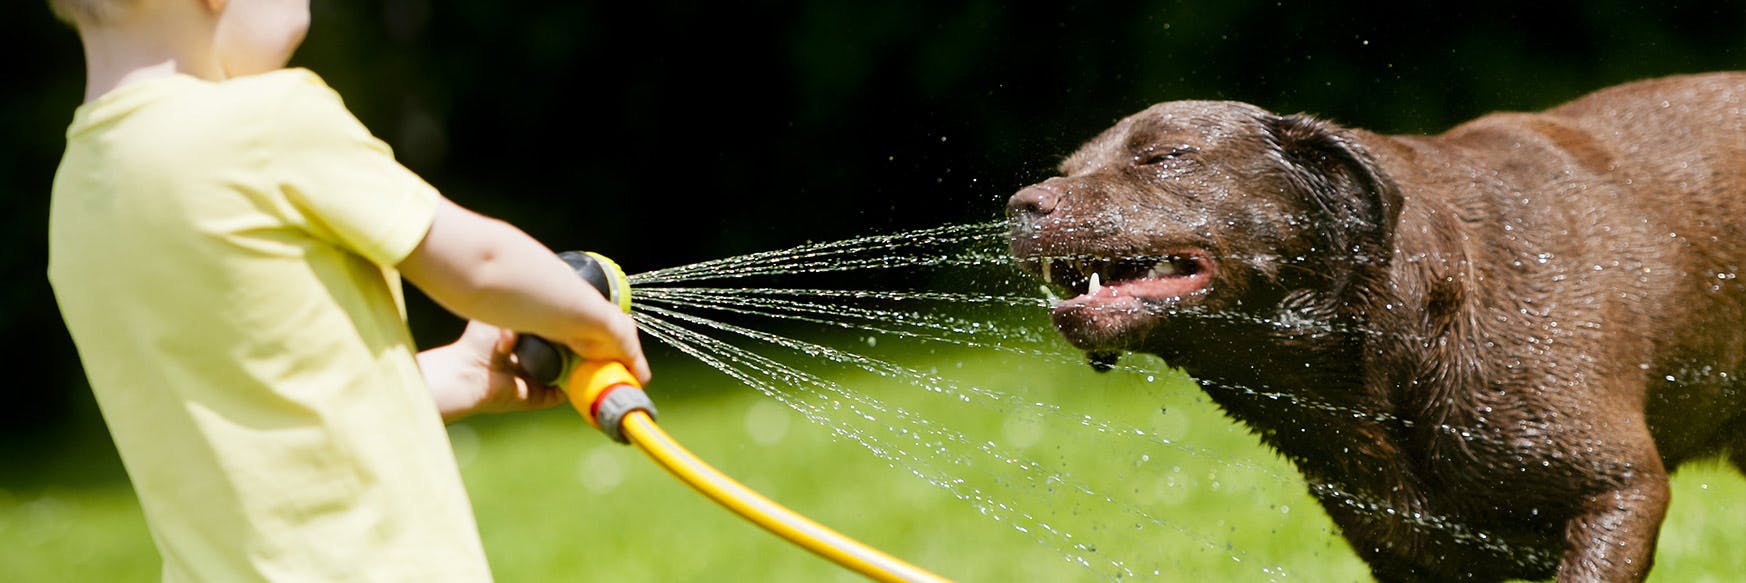 wellness-how-to-prevent-your-dog-from-overheating-hero-image